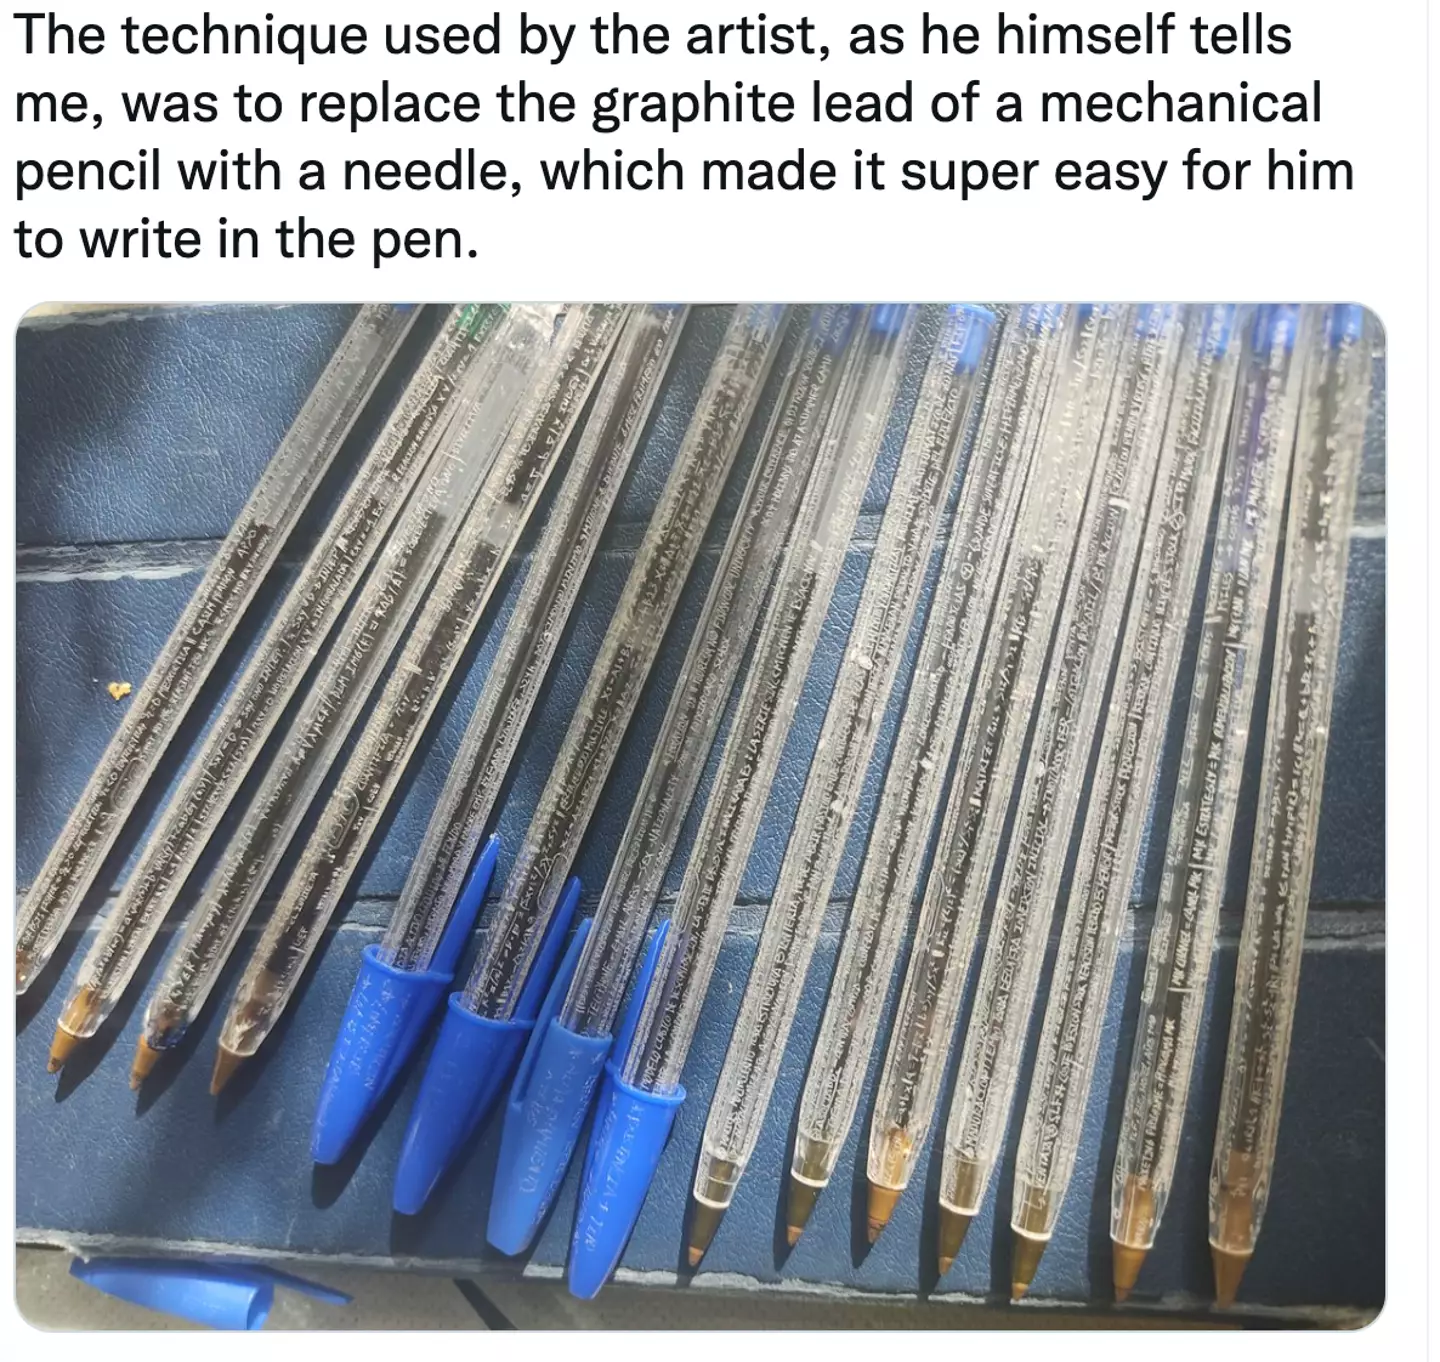 The student is said to have used a needle to write on the pens.